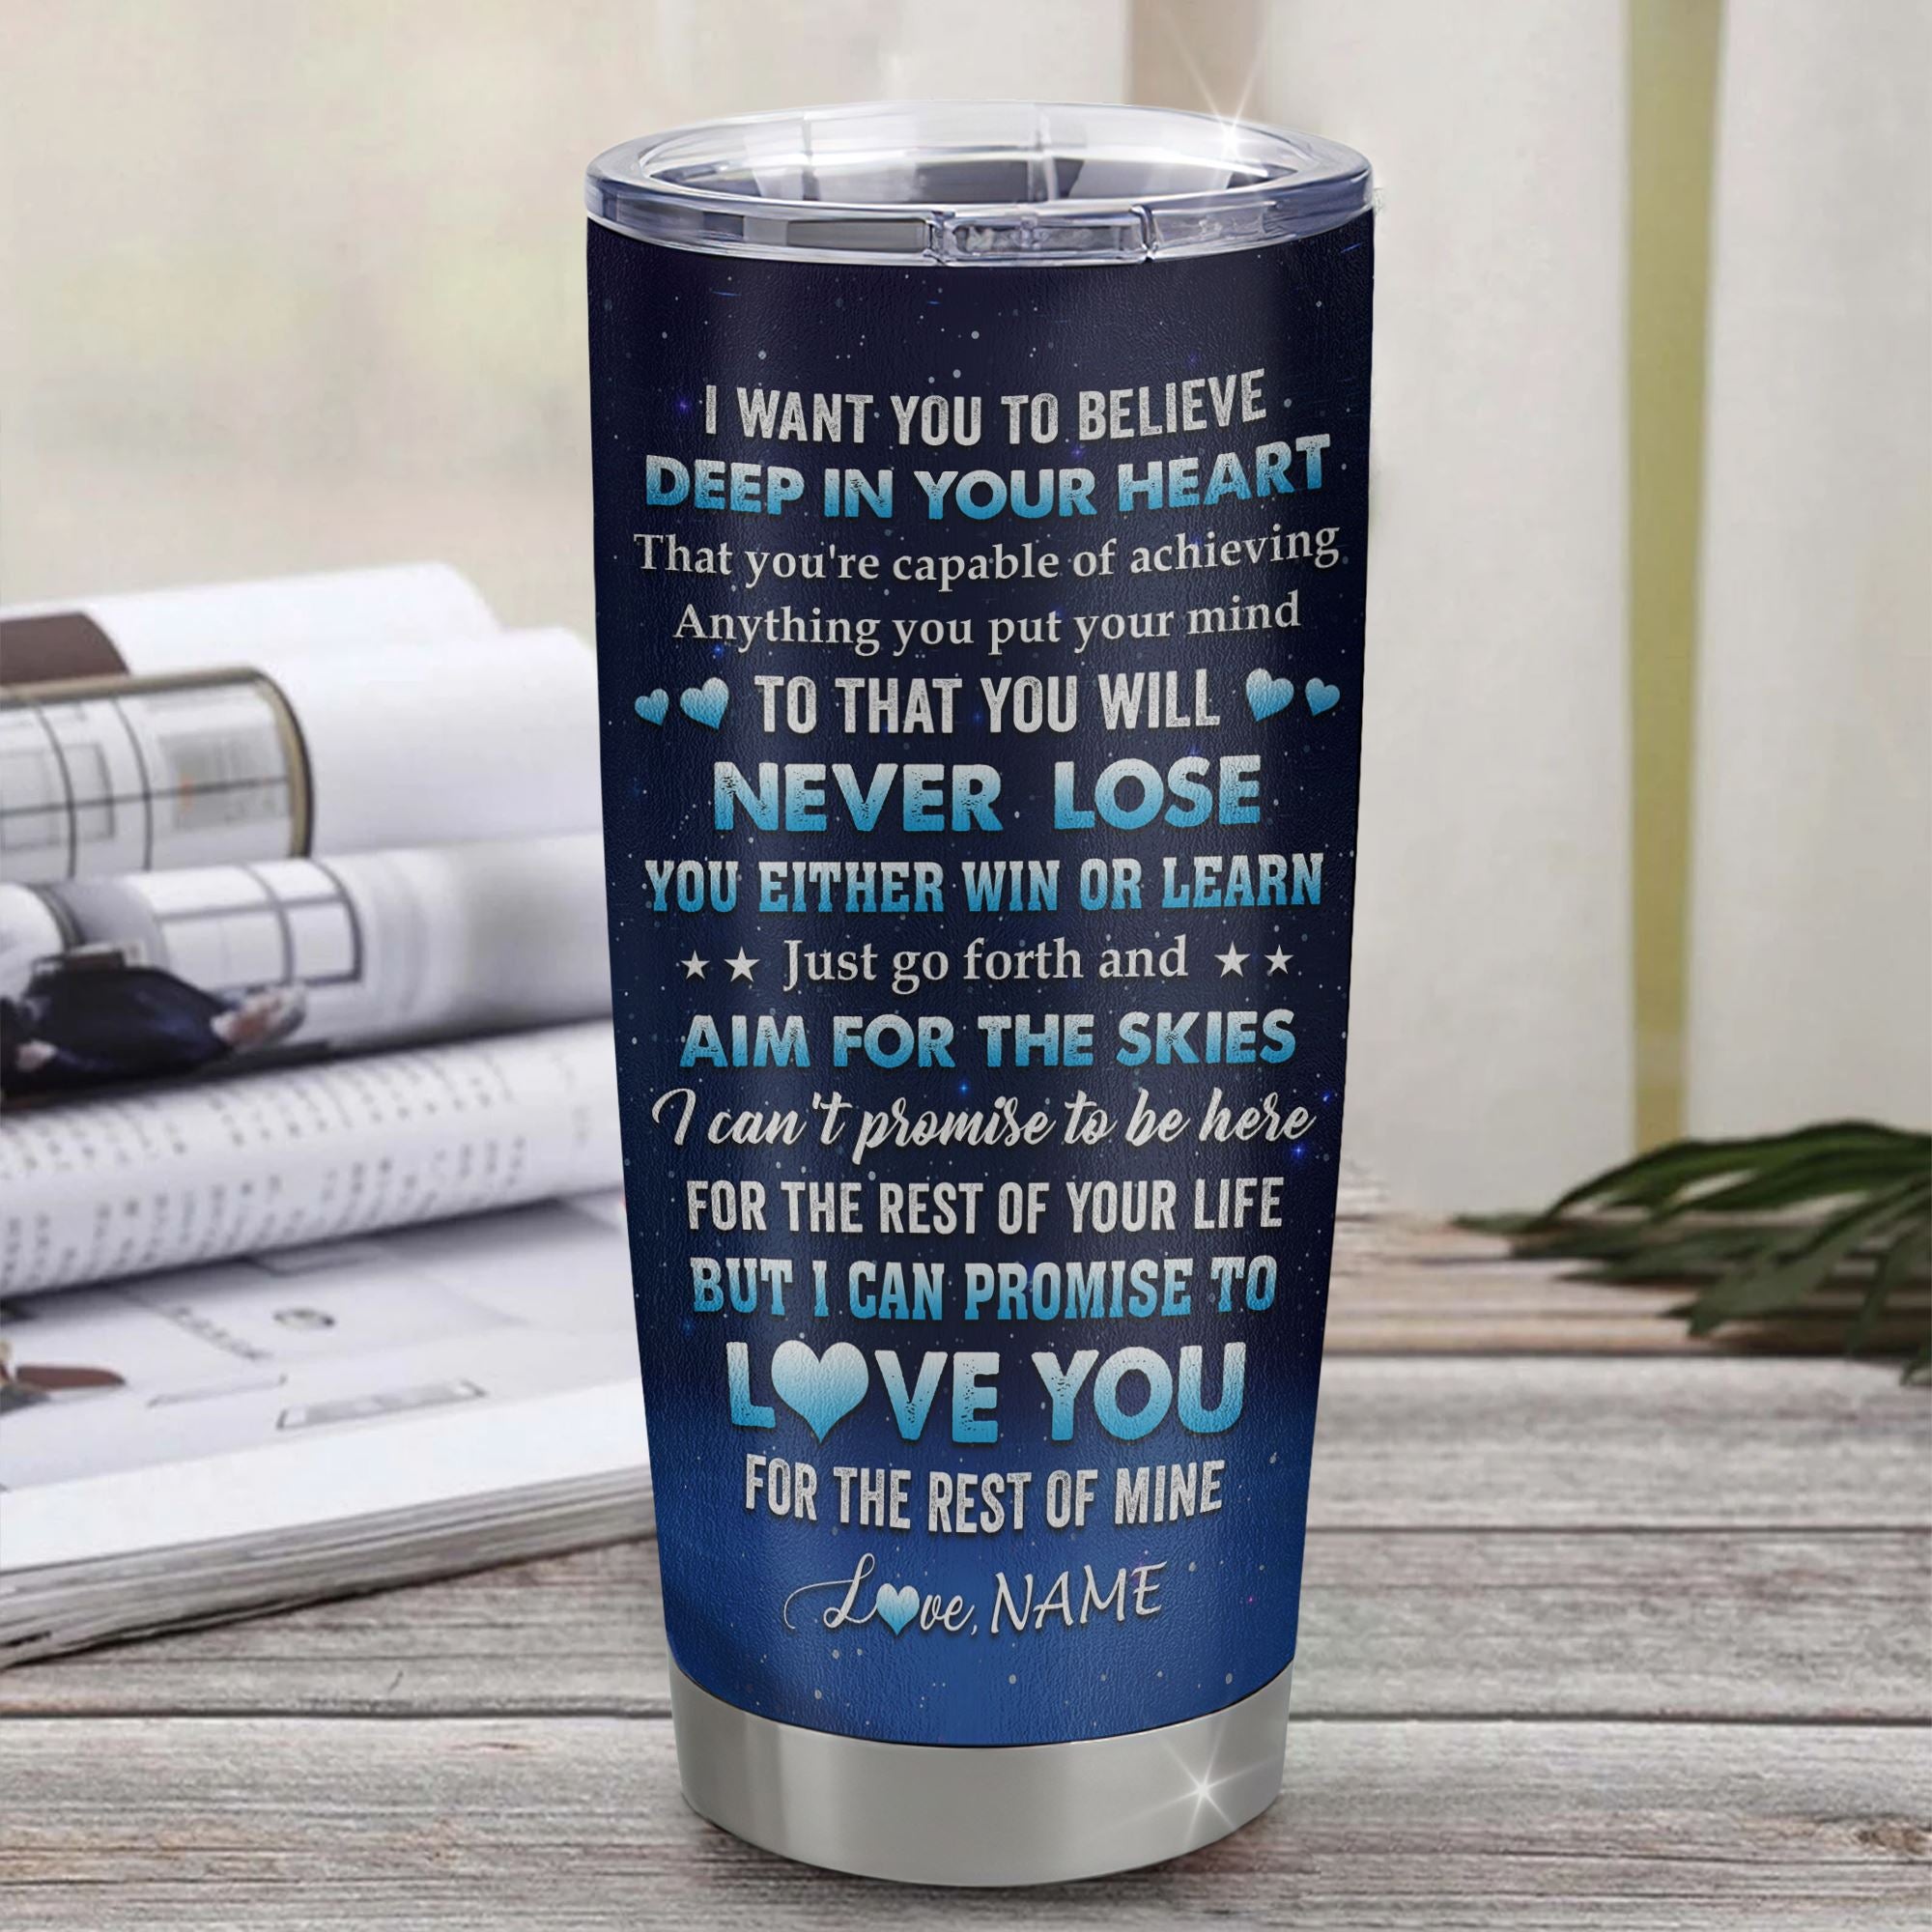 Personalized_To_My_Granddaughter_Lion_From_Grandma_Tumbler_Stainless_Steel_Cup_Believe_Your_Heart_Granddaughter_Gift_Birthday_Graduation_Christmas_Travel_Mug_Tumbler_mockup_1.jpg